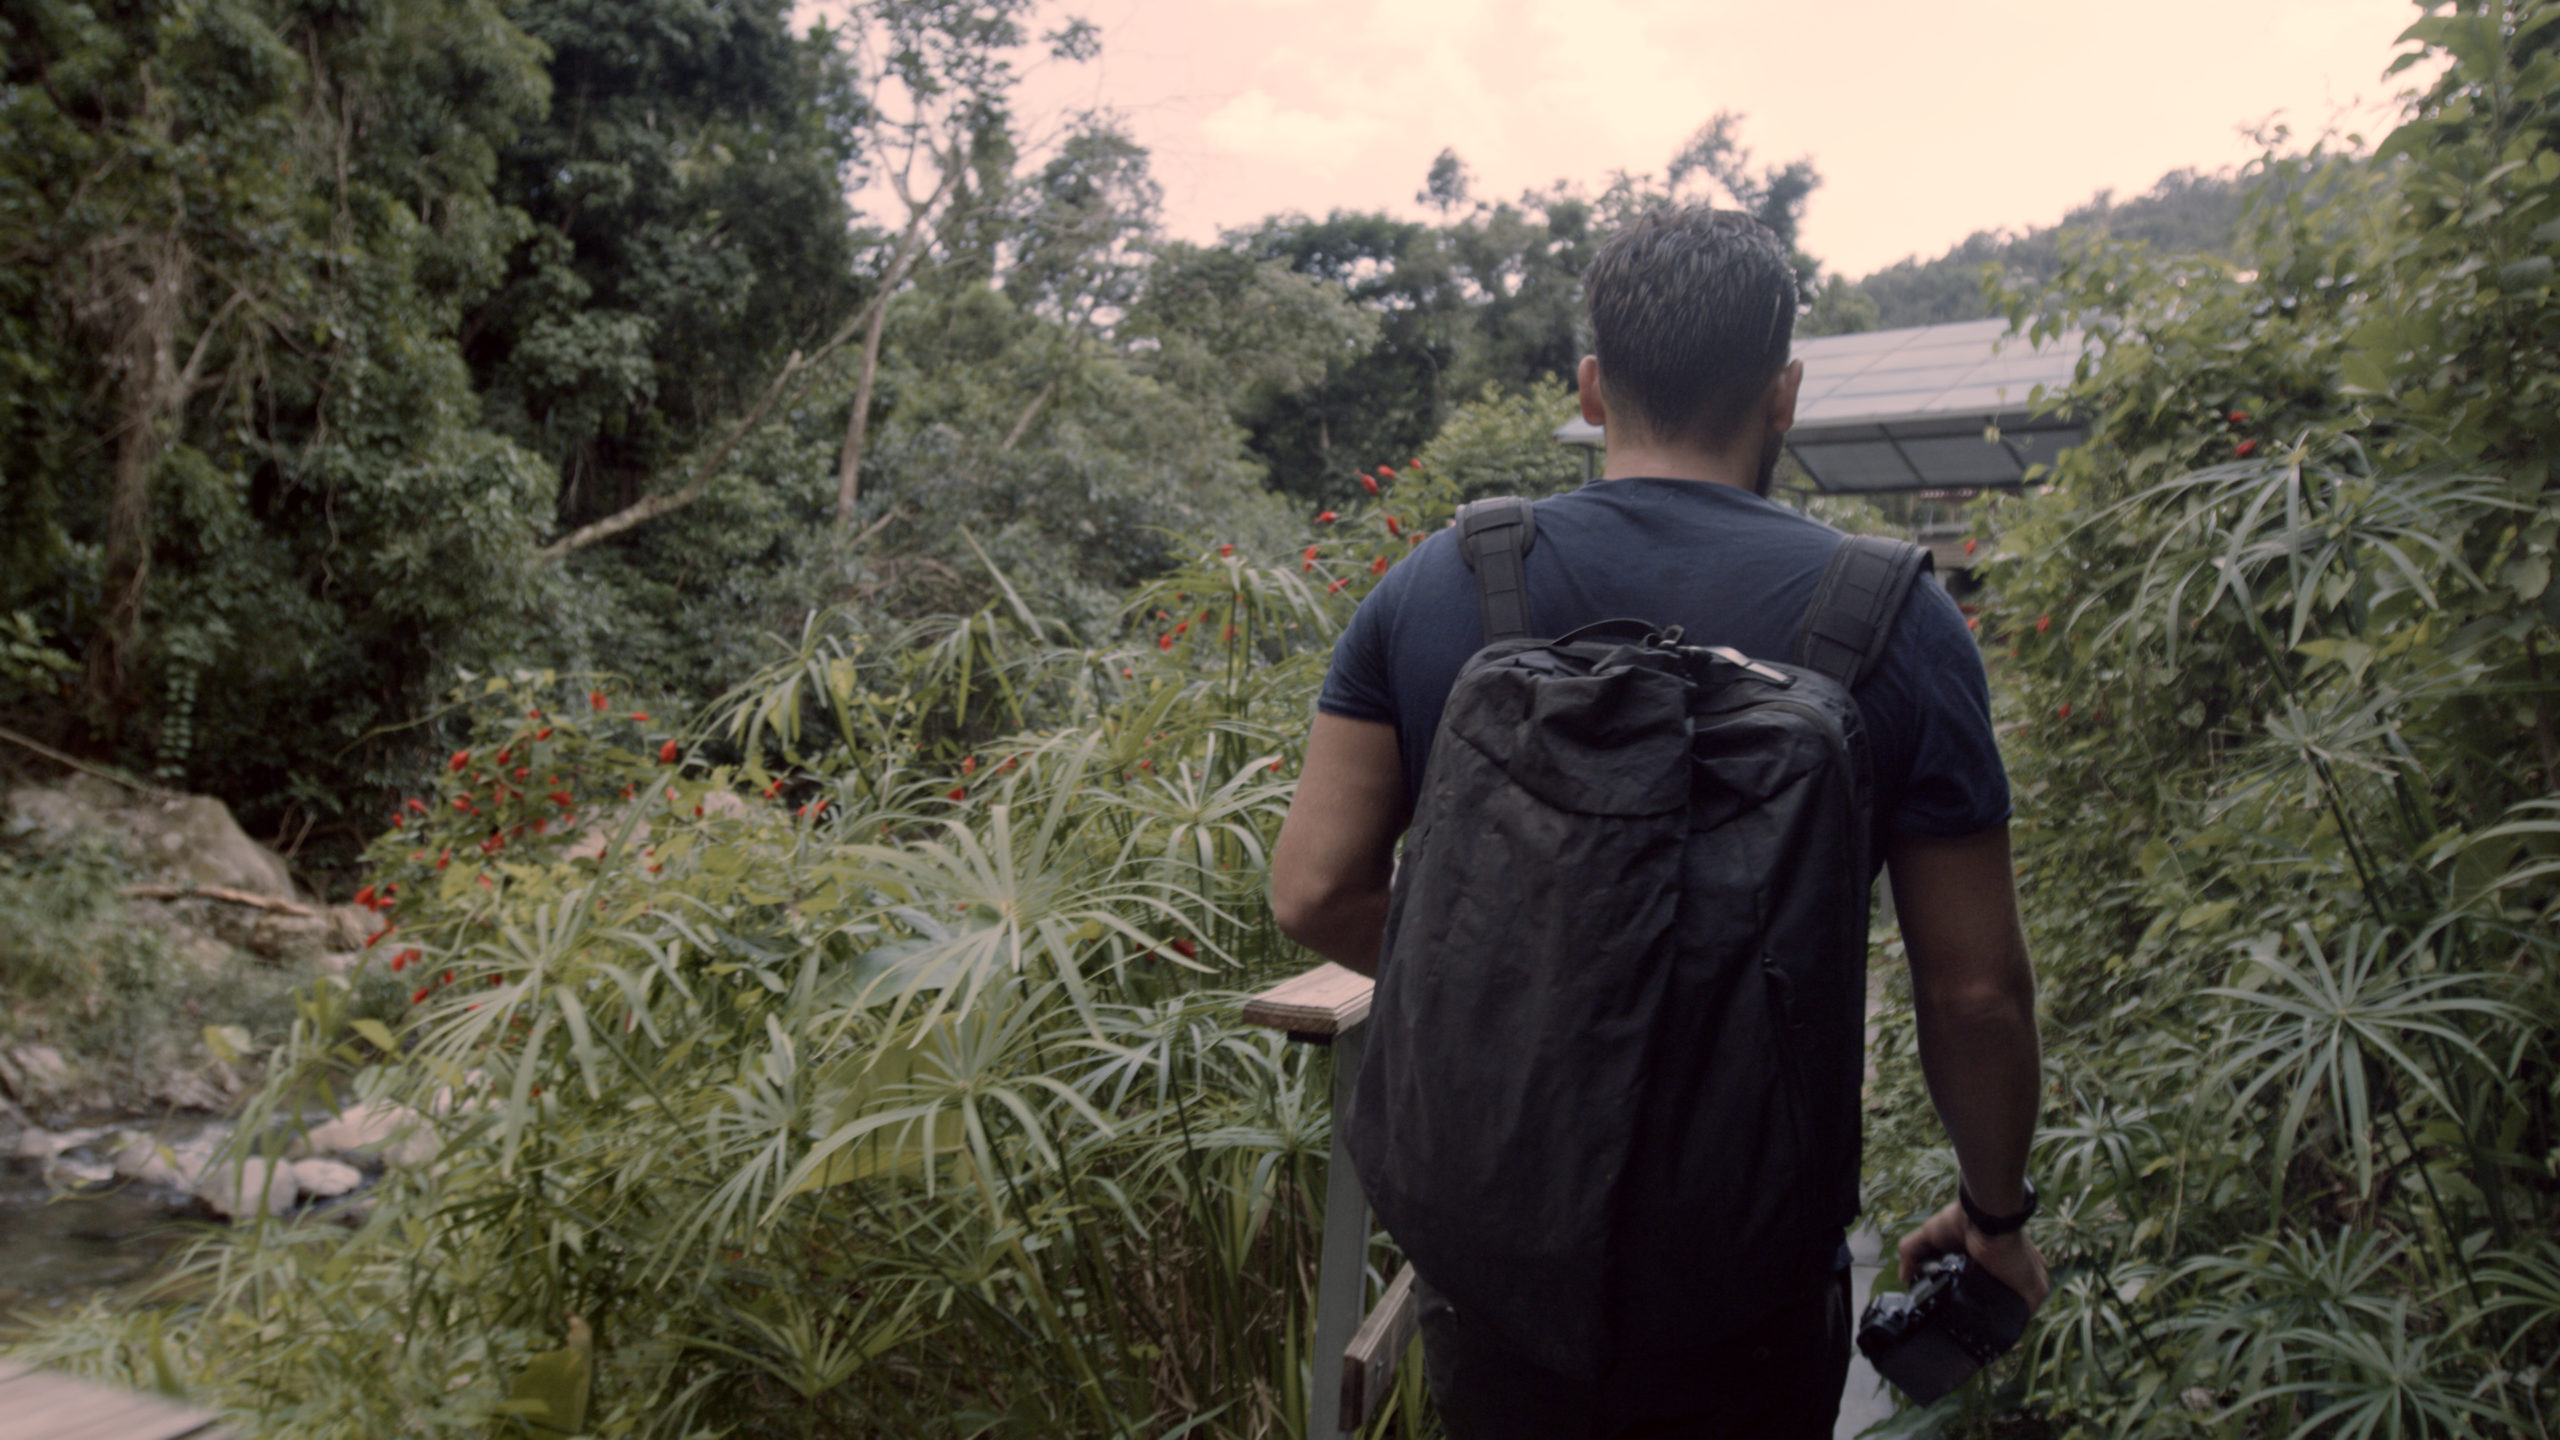 Blackmile View from behind of a man hiking through a garden wearing a black backpack